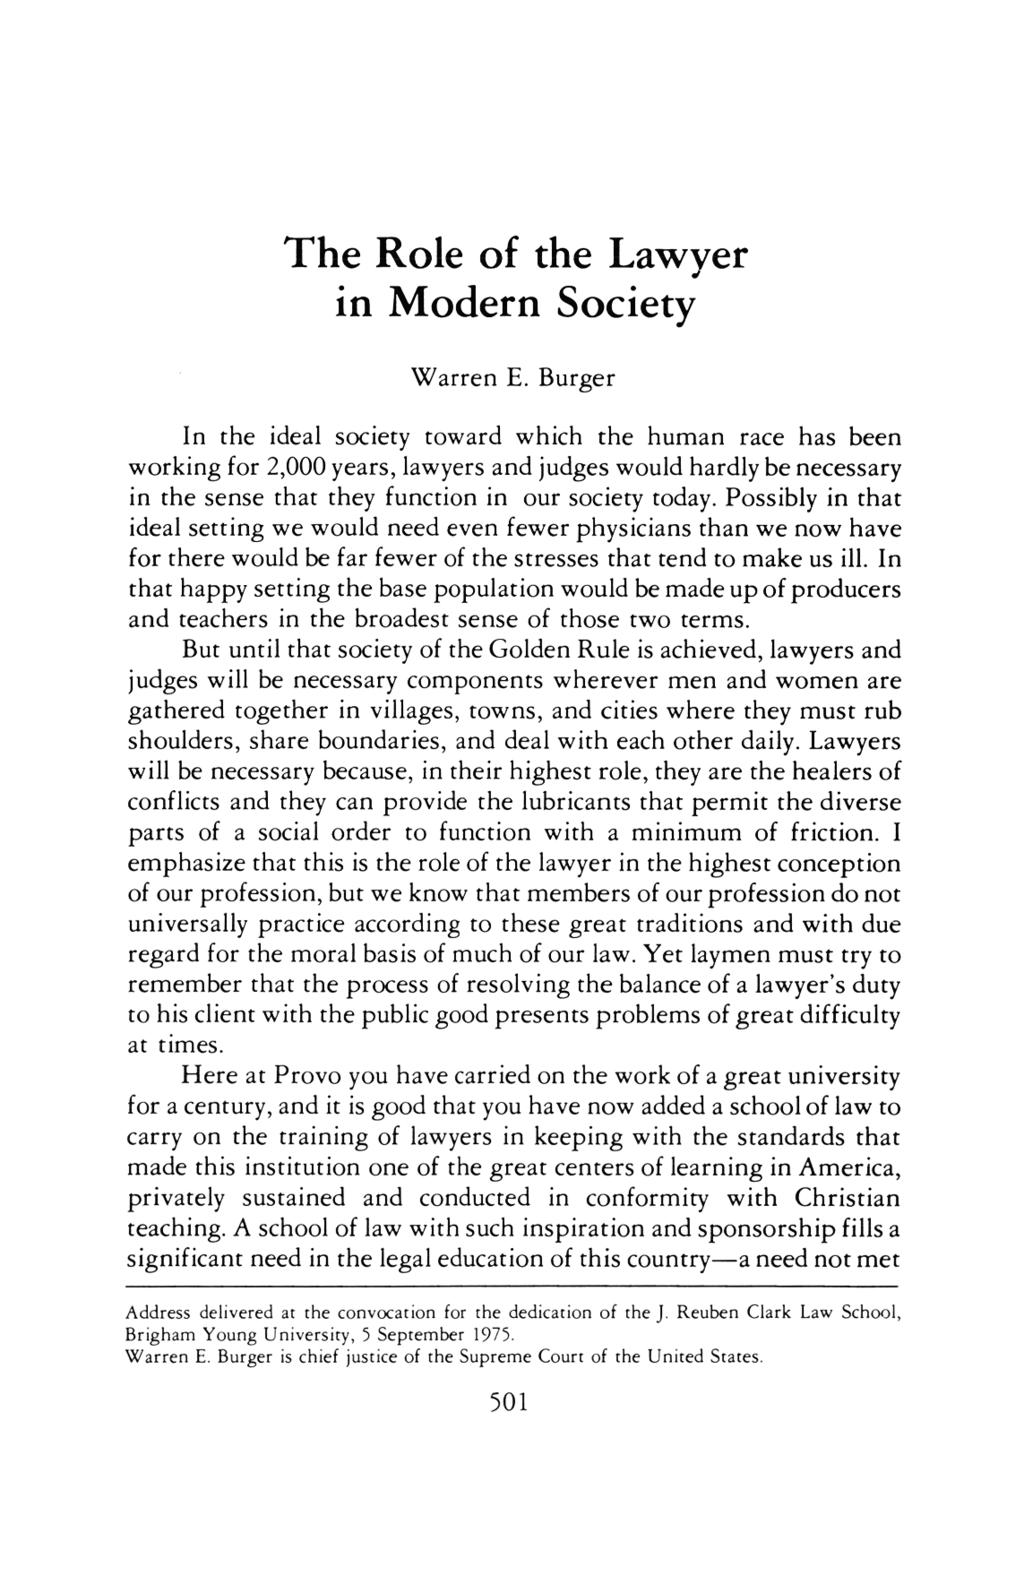 Burger: The Role of the Lawyer in Modern Society the role of the lawyer in modern society warren E burger in the ideal society toward which the human race has been working for 2000 years lawyers and